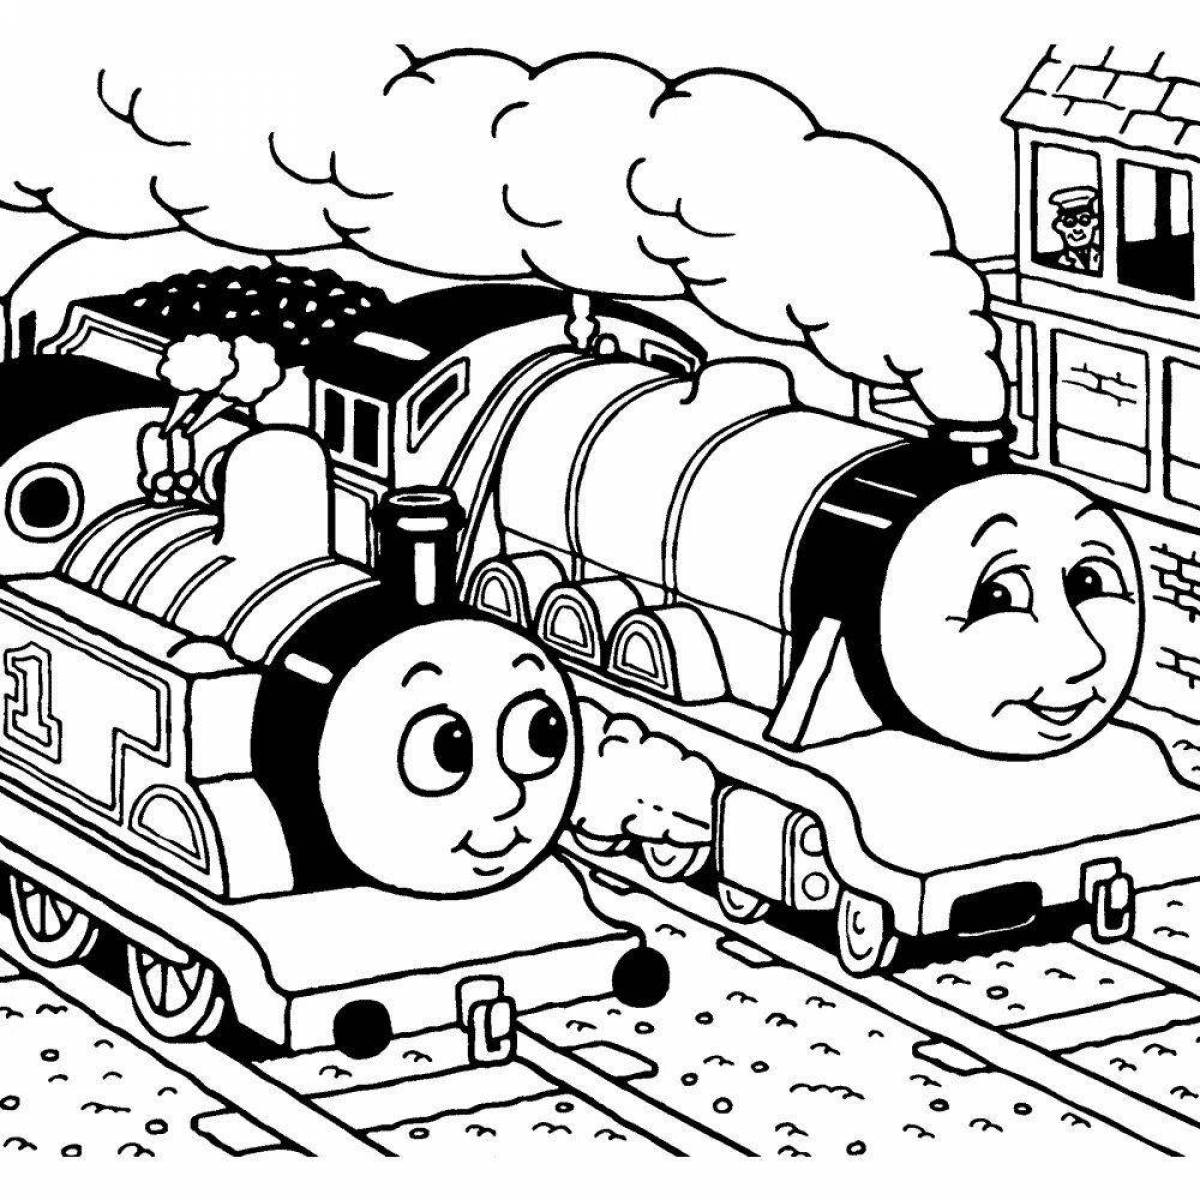 Charles the Engine Animated Coloring Page